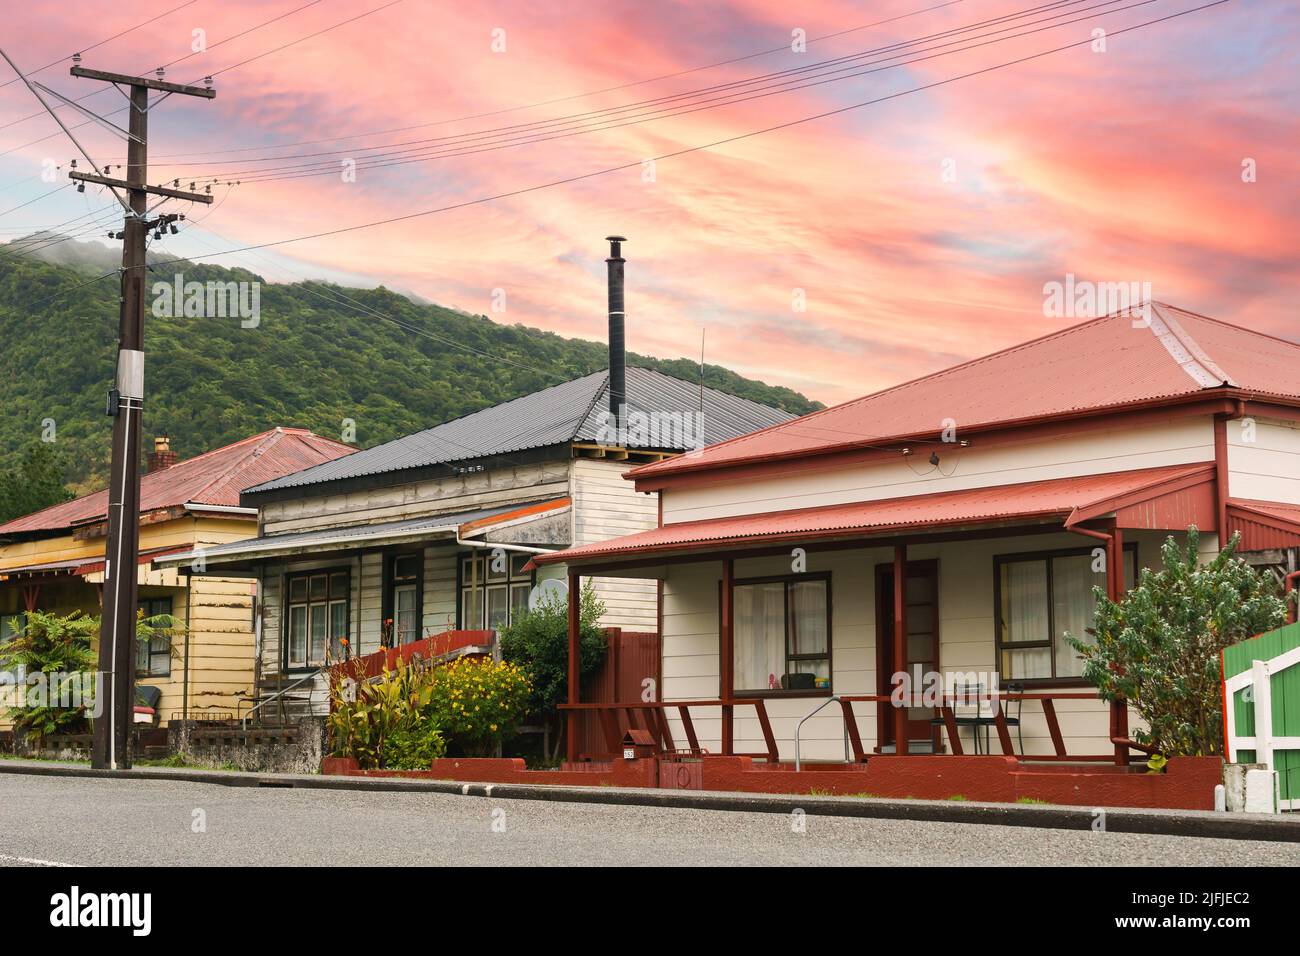 Street view of Old heritage style homes with veranda and entrance on street in Cobden Greymouth, New zealand. Stock Photo